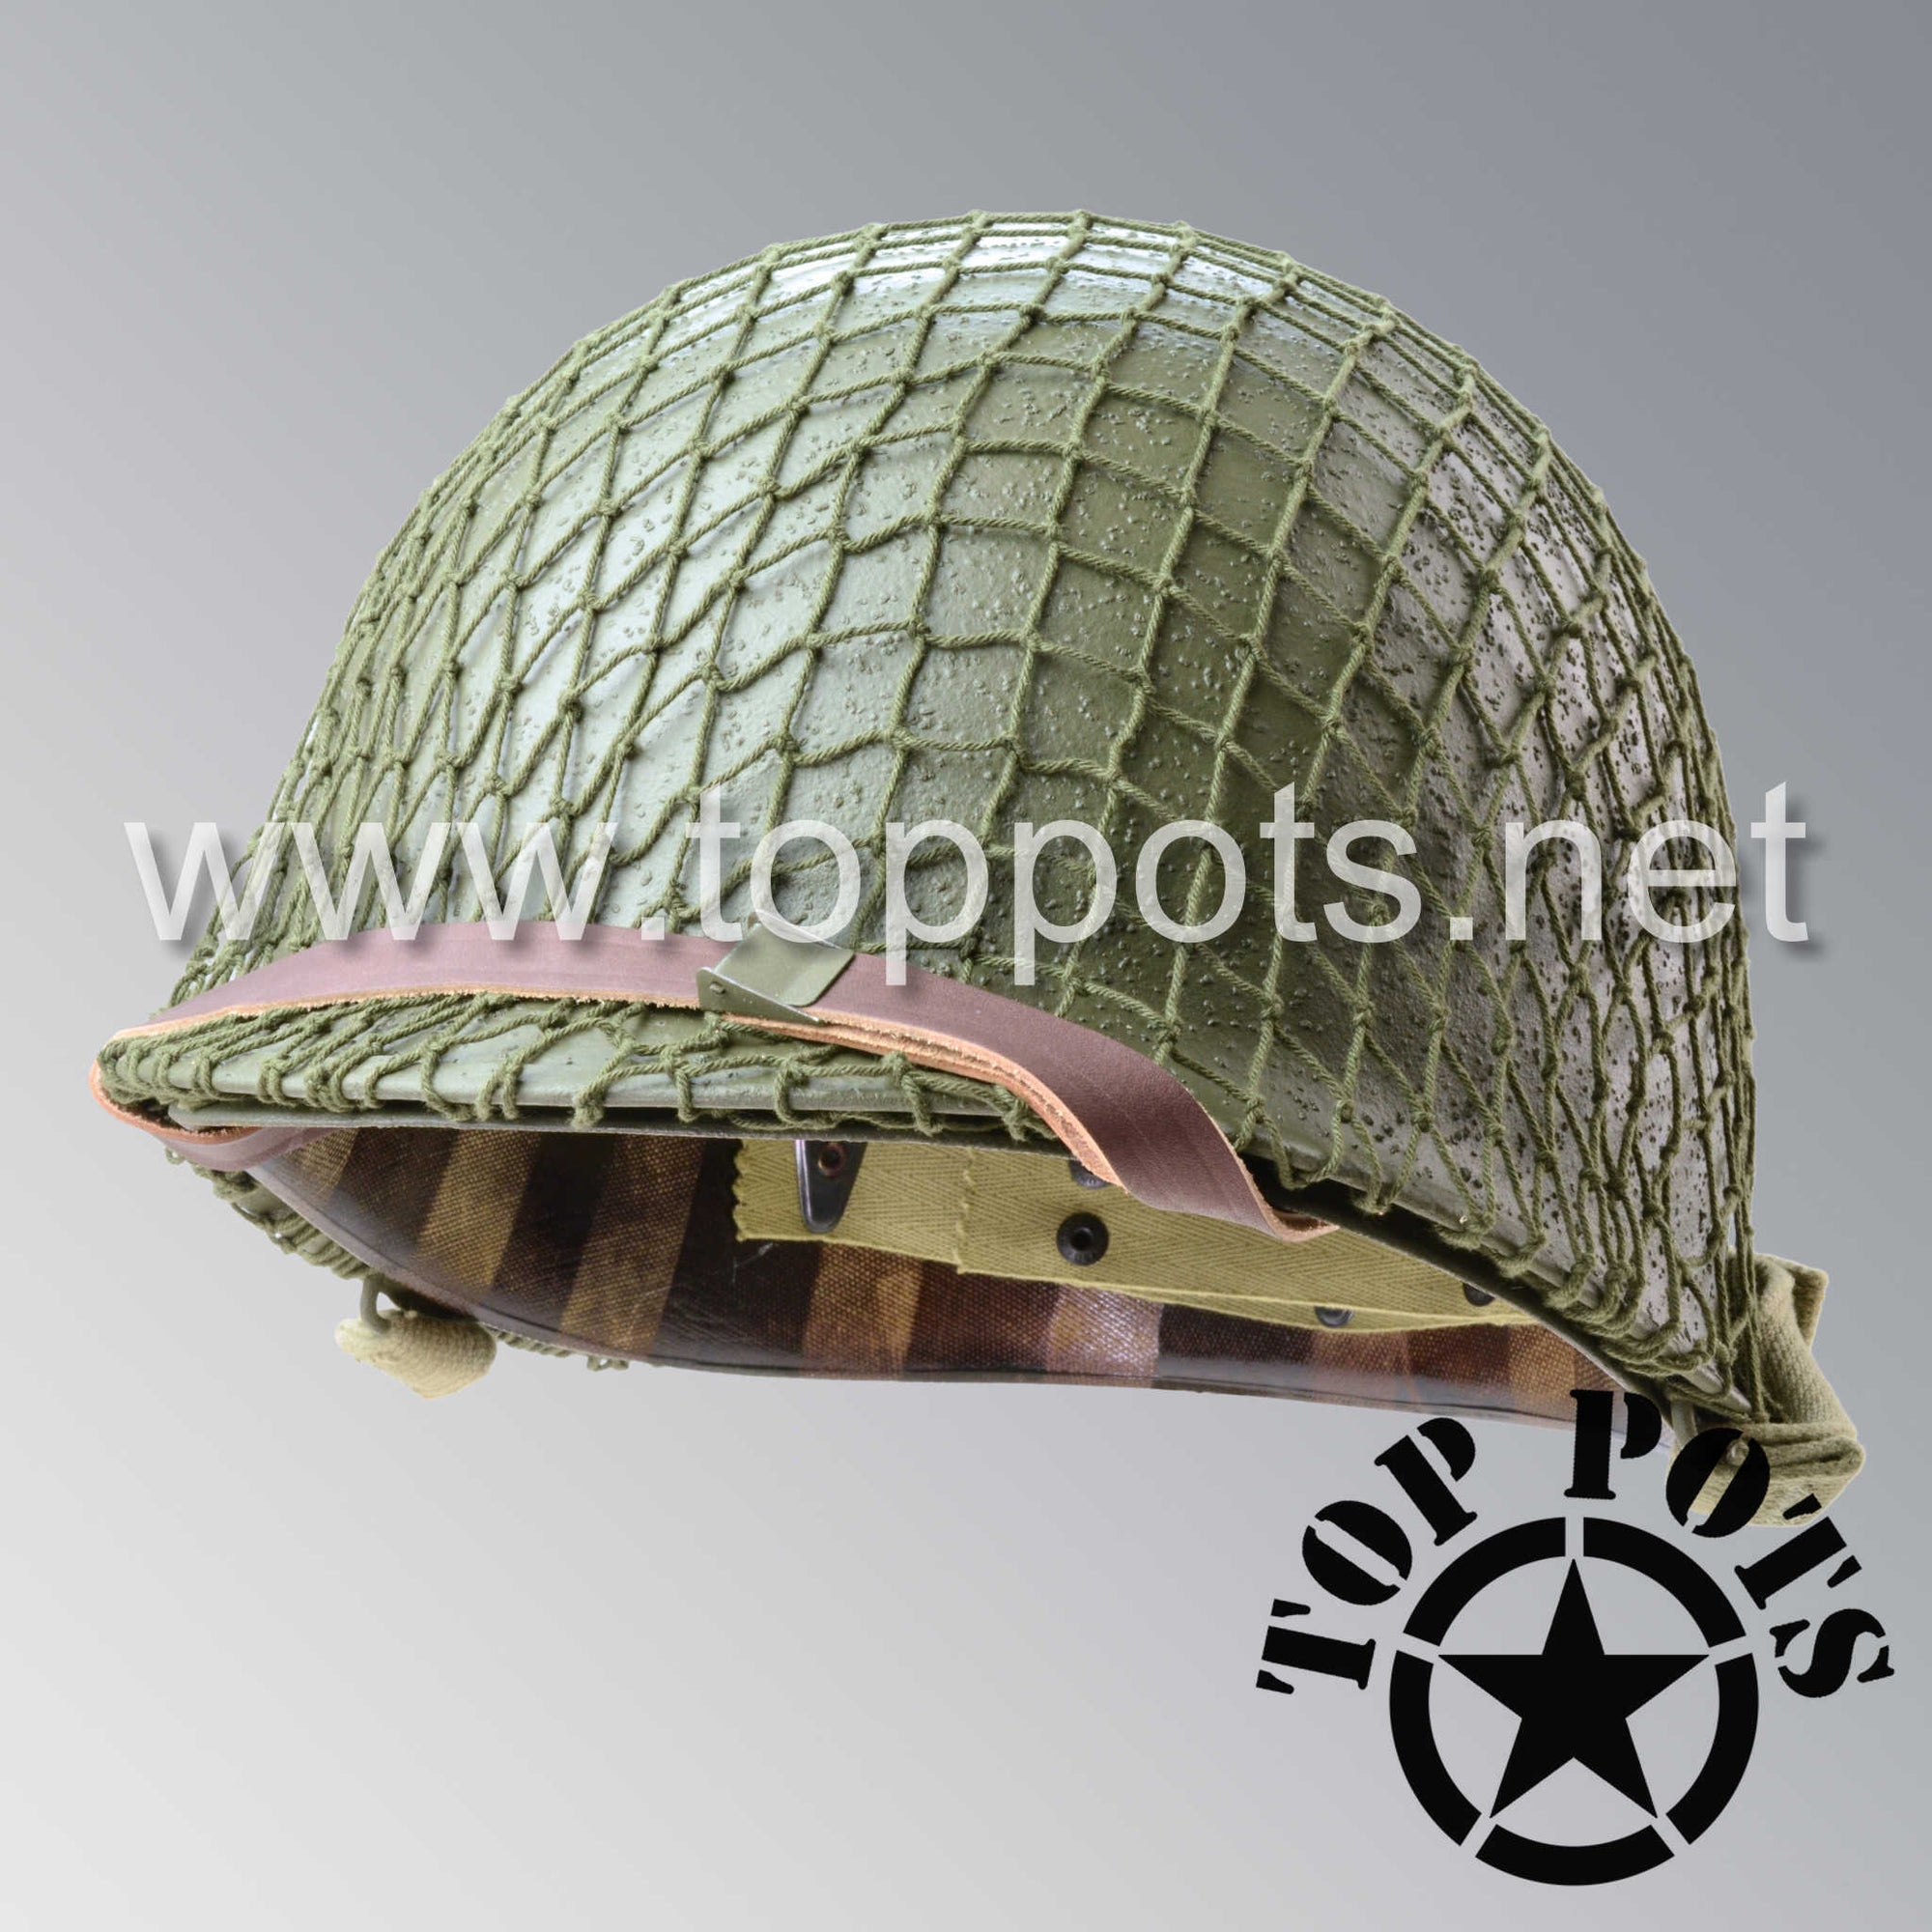 WWII US Army Restored Original M1 Infantry Helmet Fix Bale Shell and Liner with Olive Drab 7 Net